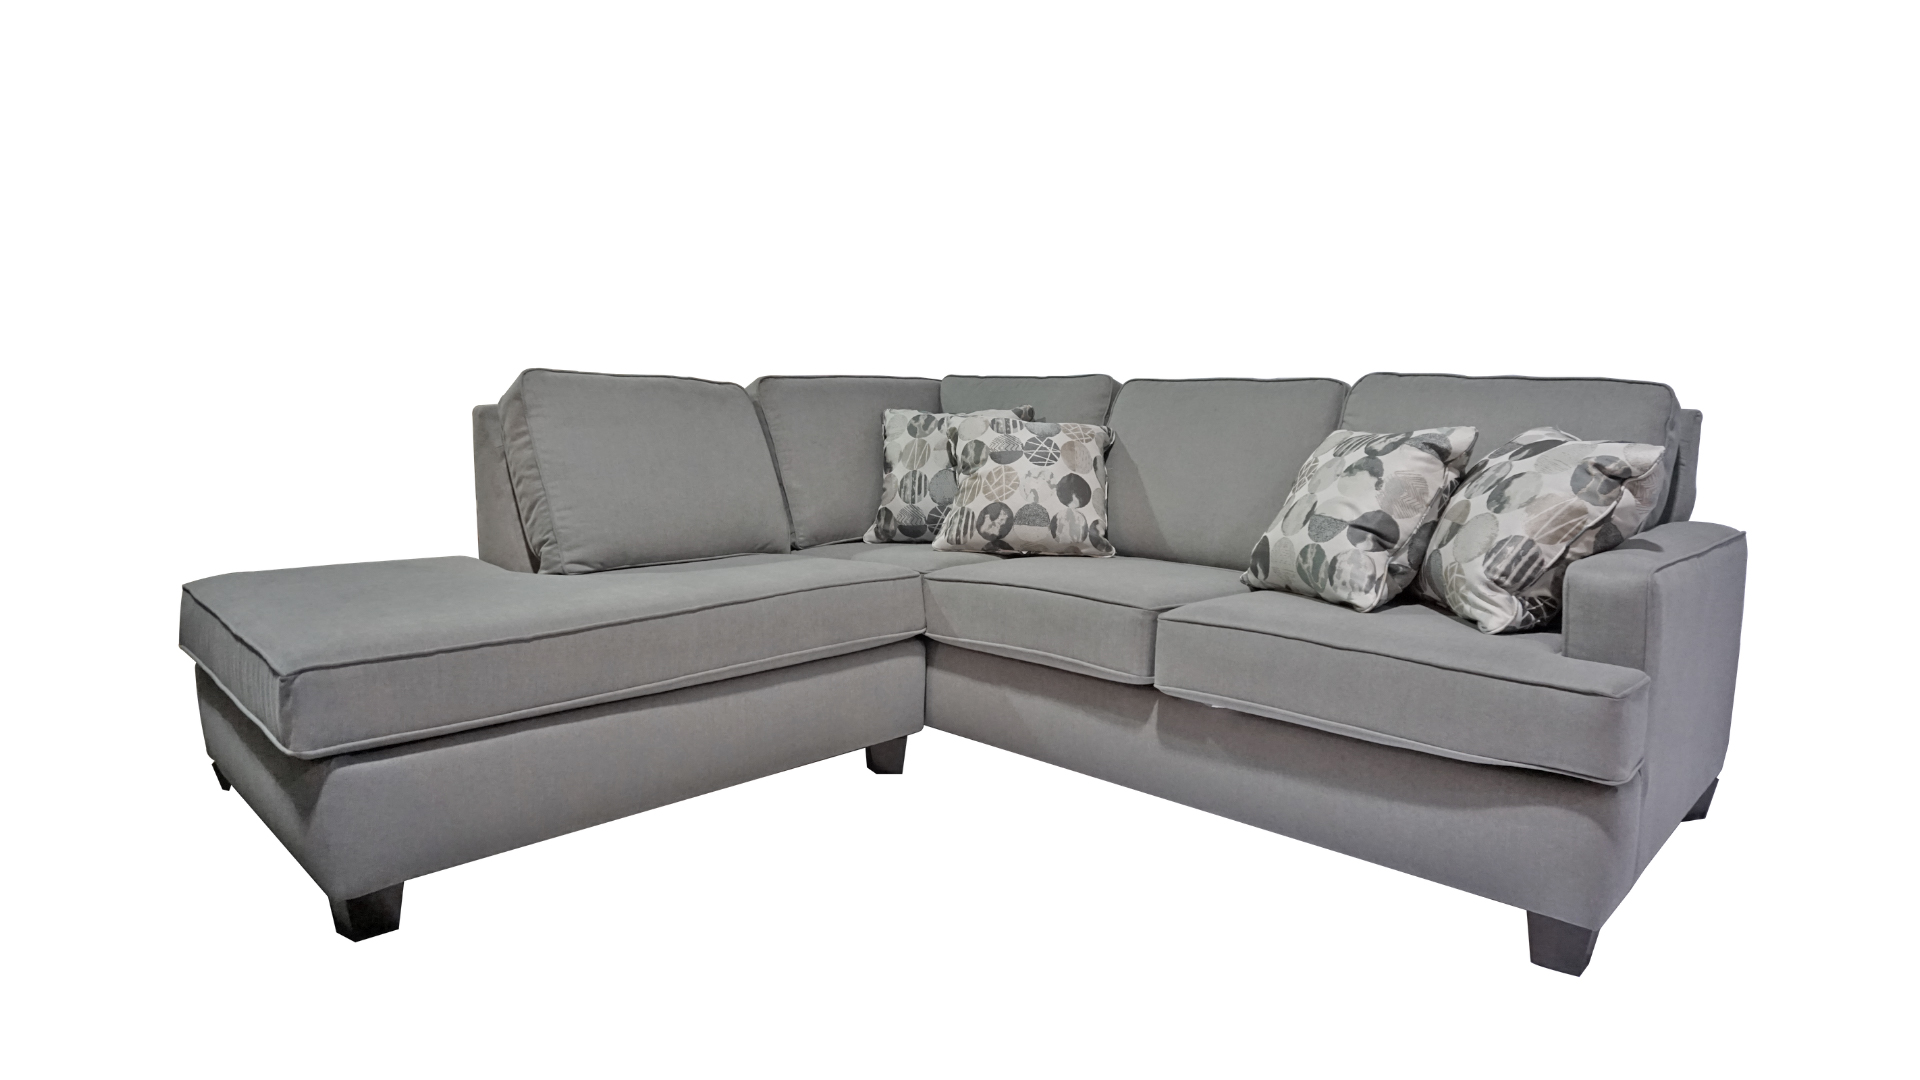 England Furniture Co. Elliott 2 Piece Chaise Sectional 20-335-075/076